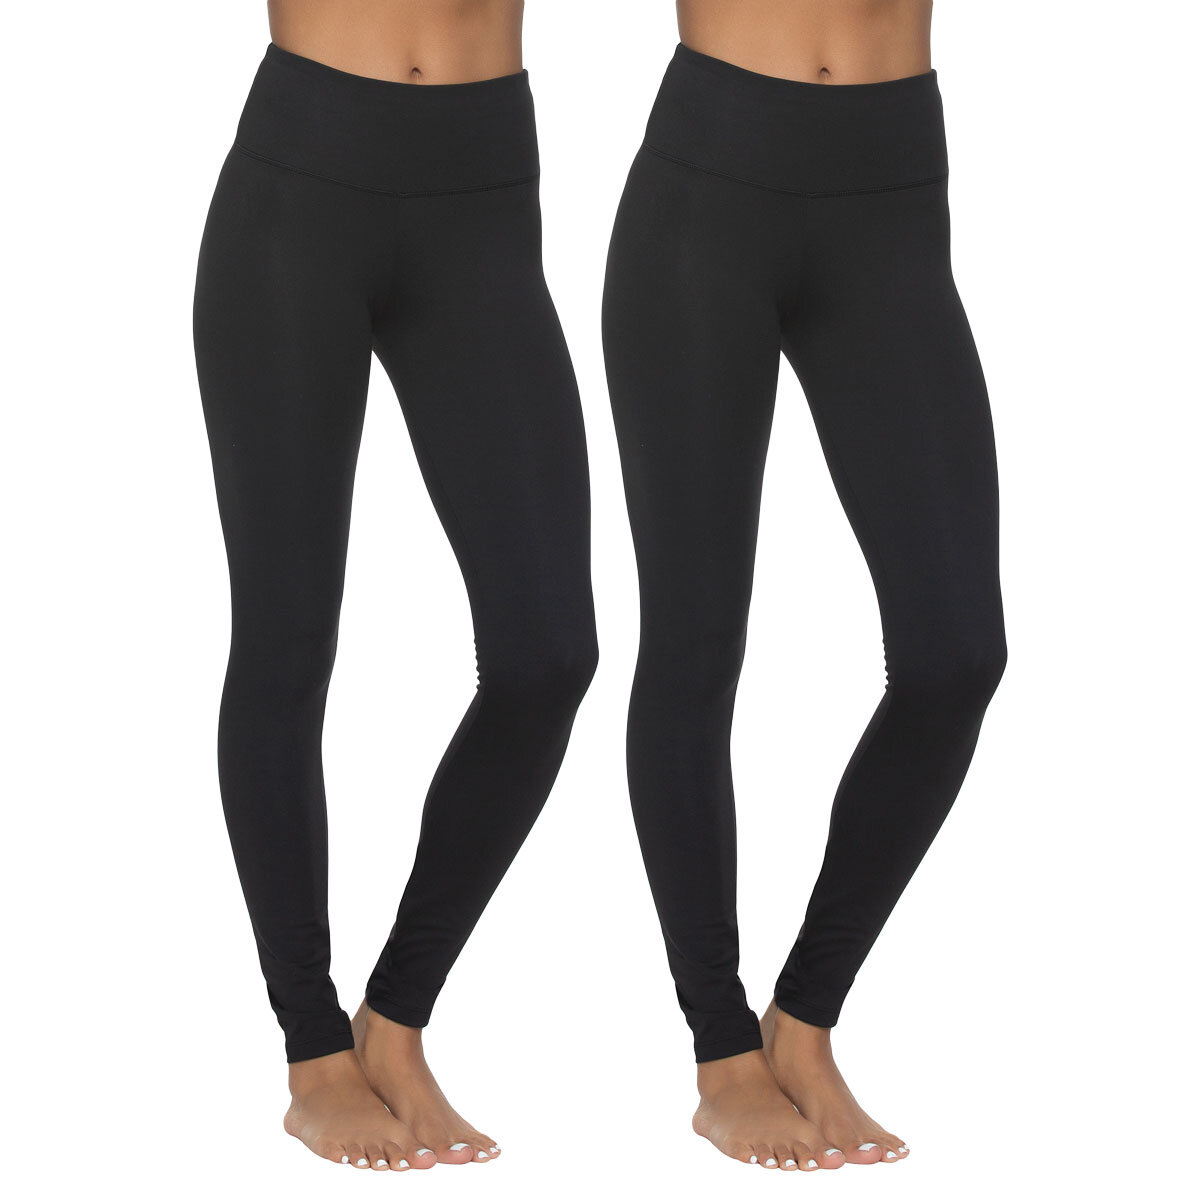 Holiday Time Women's Sueded Holiday Leggings-2 pack